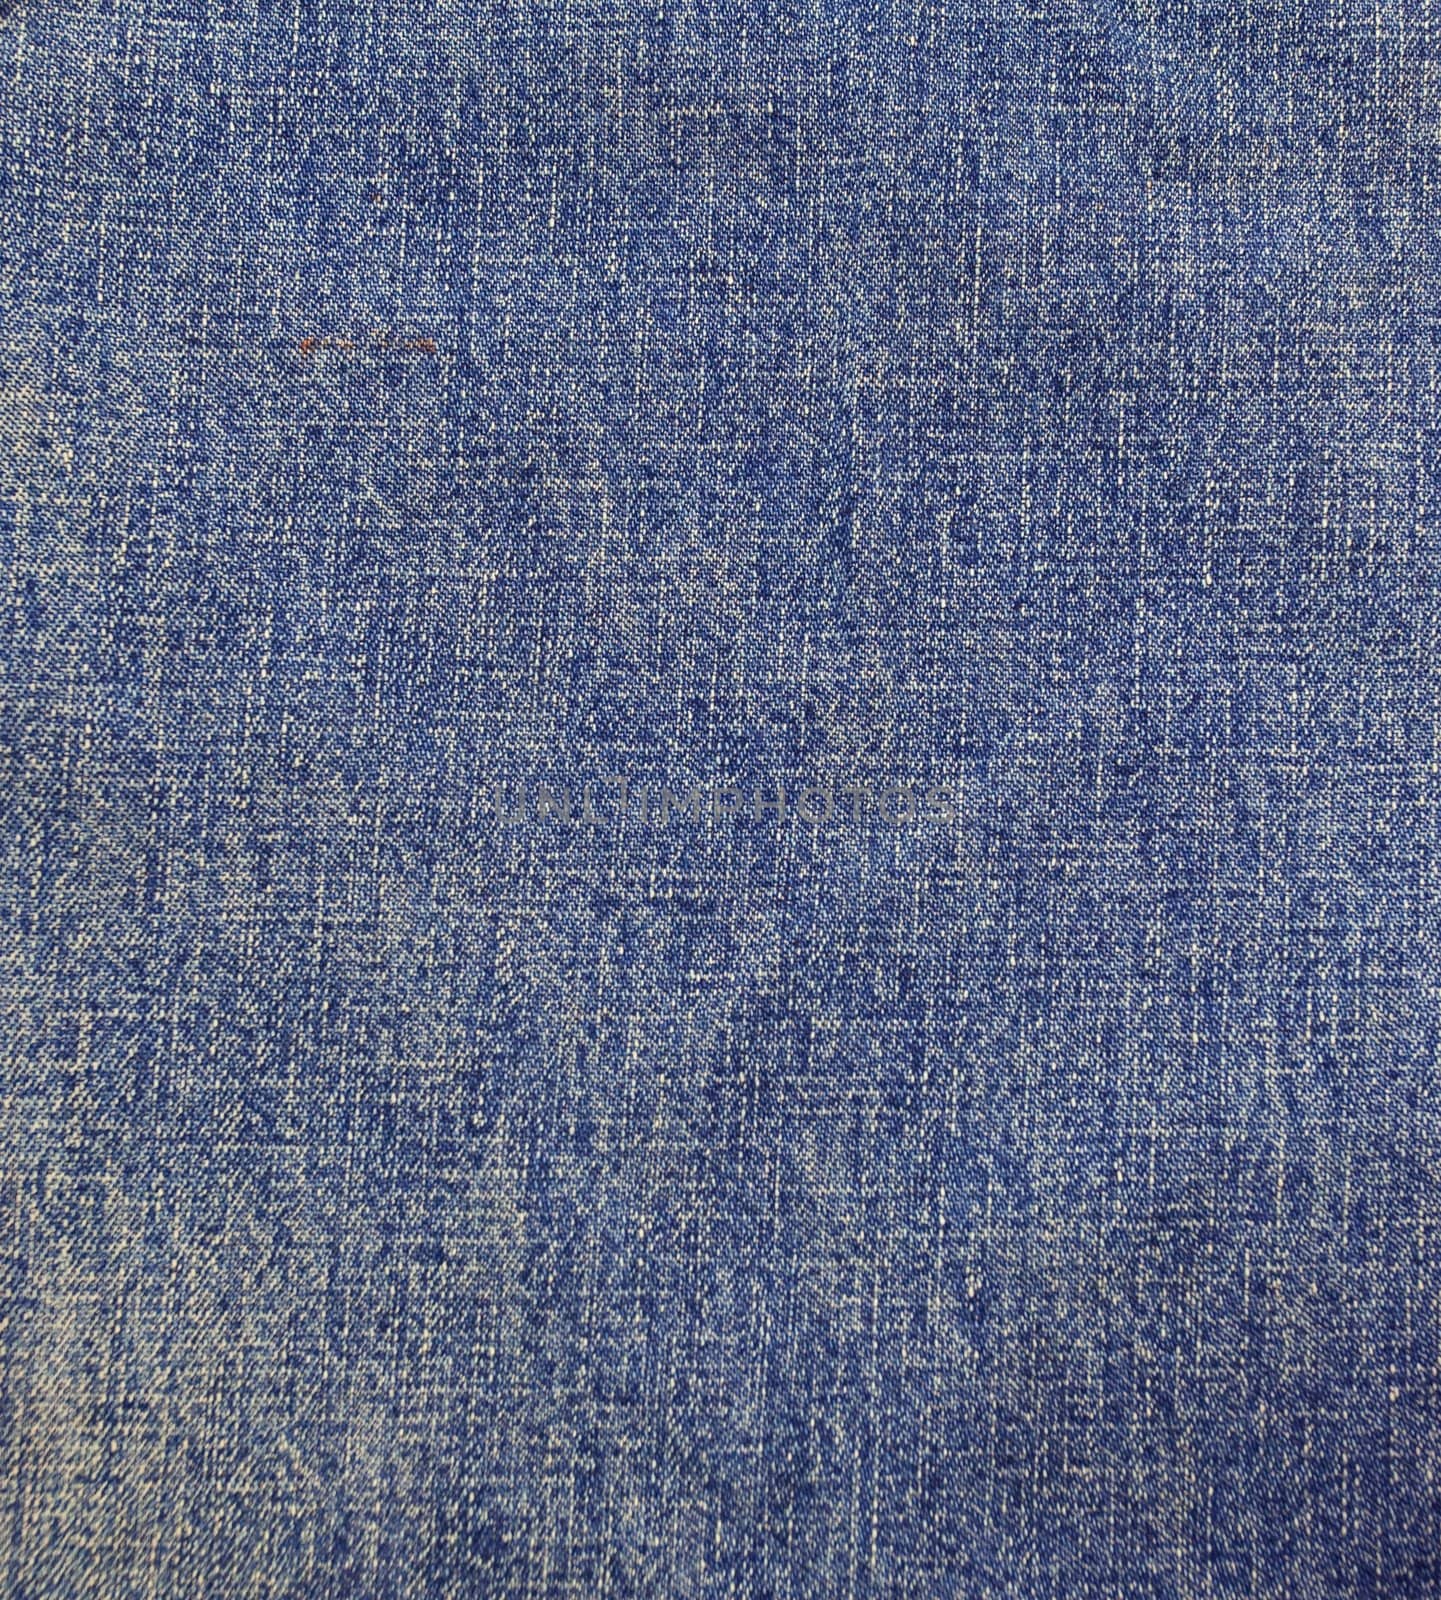 old blue jeans texture pattern as background